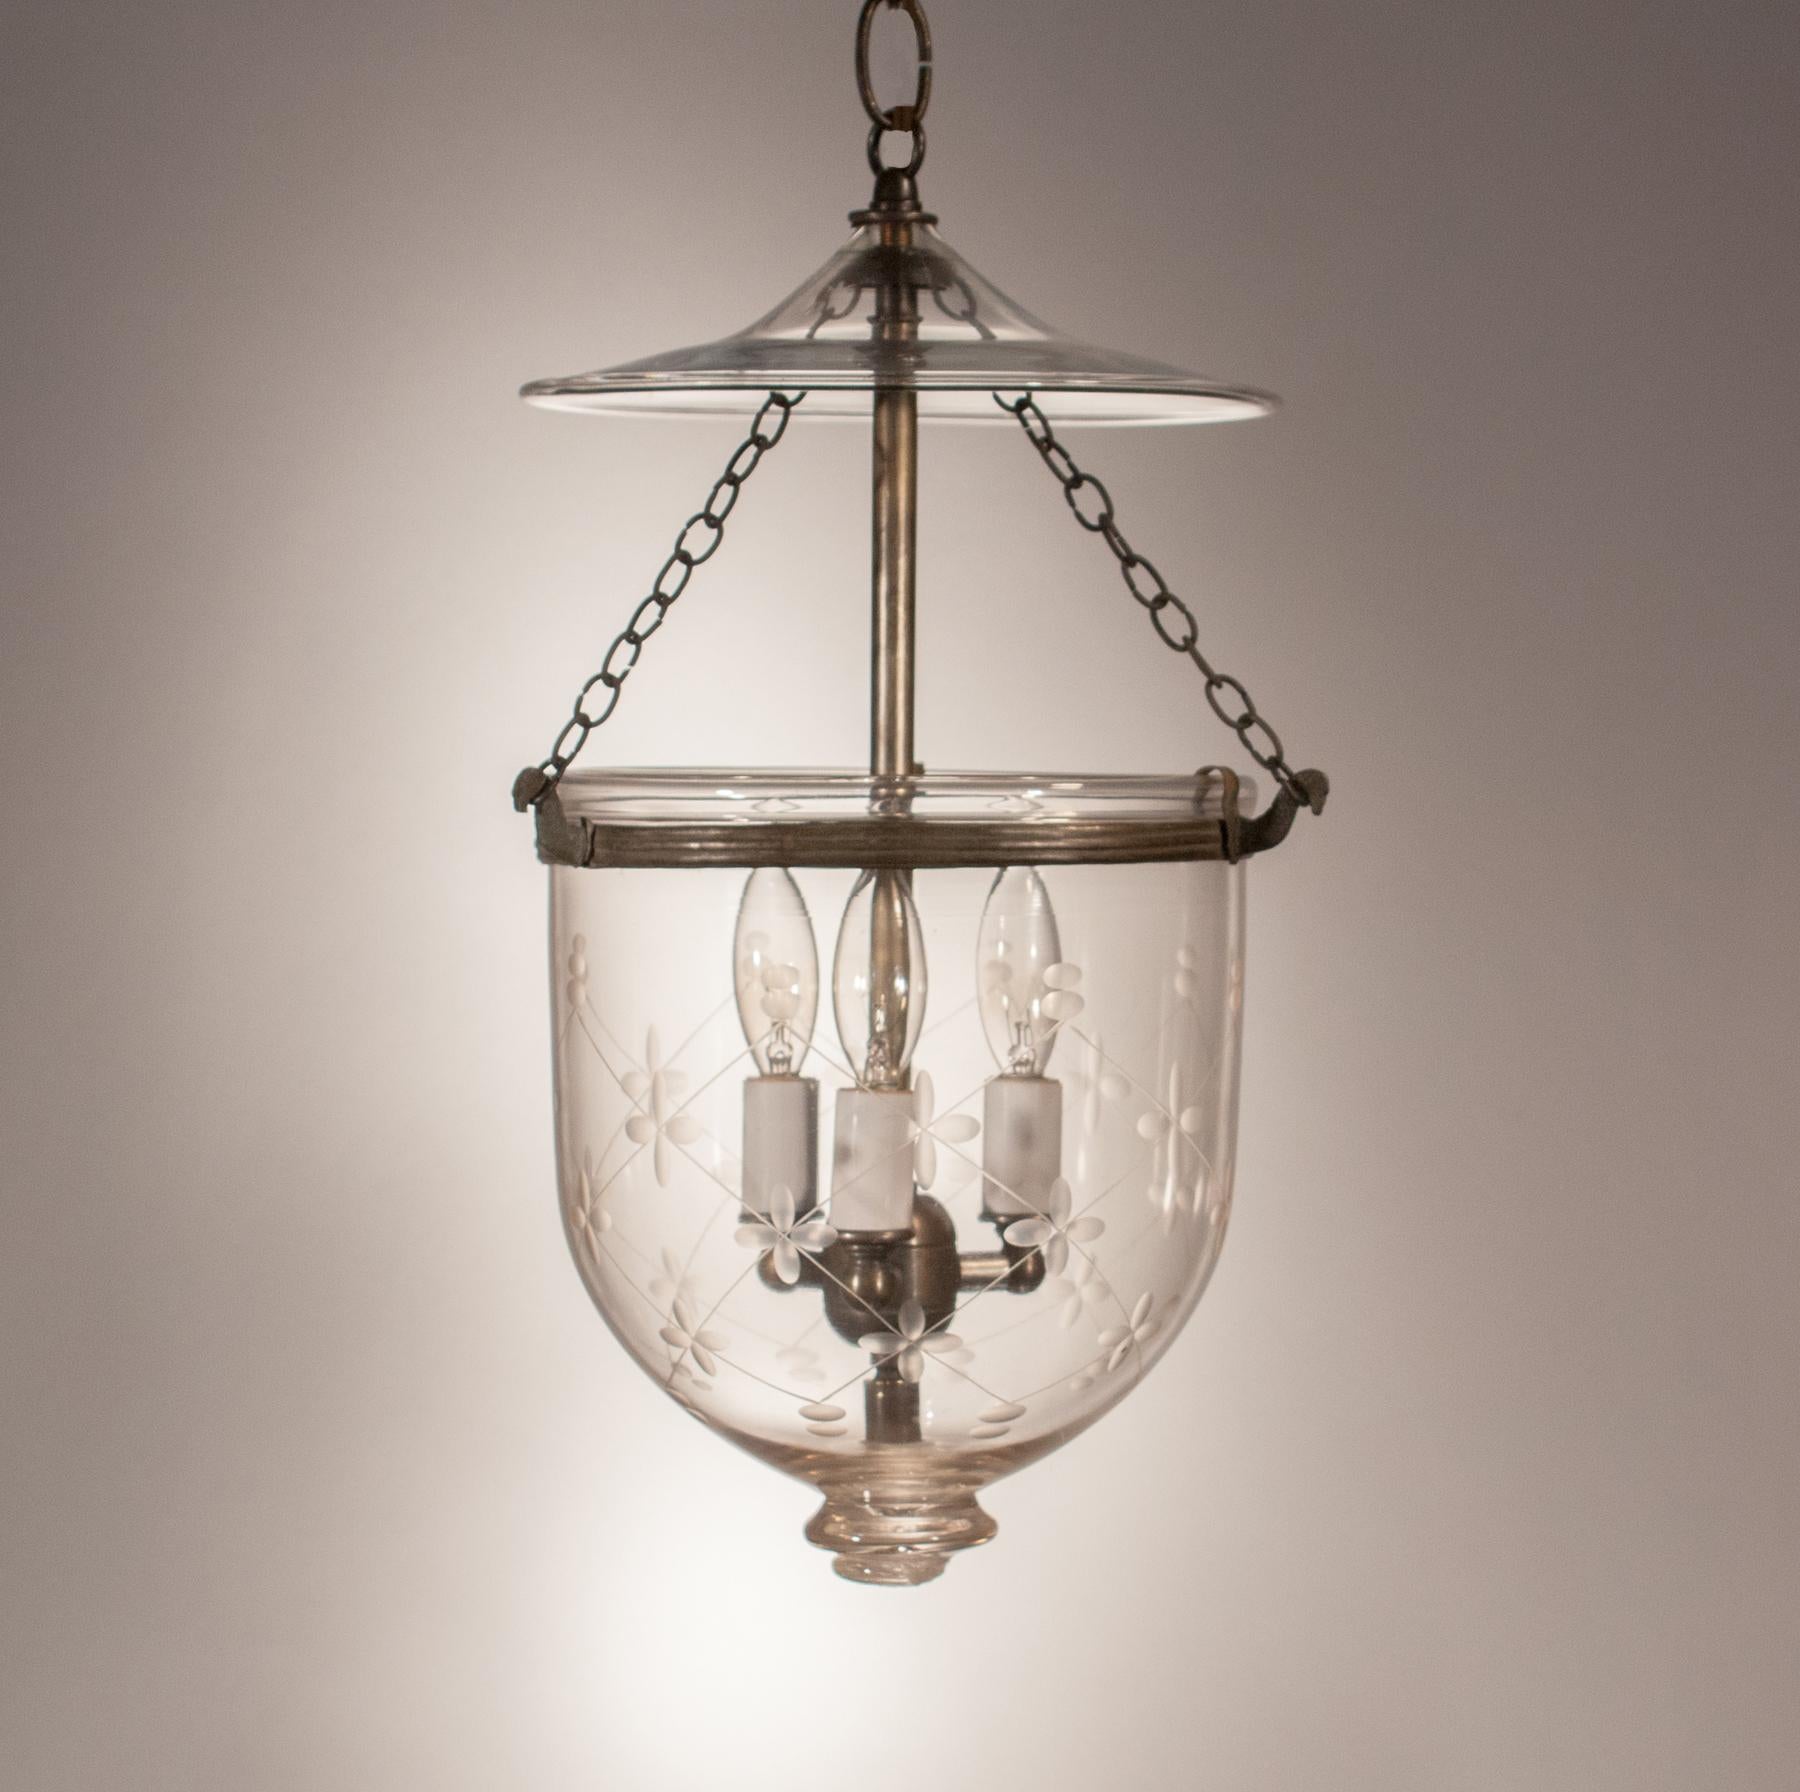 Every bell jar lantern has its own distinct character. This charming, circa 1890 pendant is no exception. Manufactured by S&C Bishop of England, the lantern has the Bishop mark on its pontil. It also has its original smoke bell and rolled brass